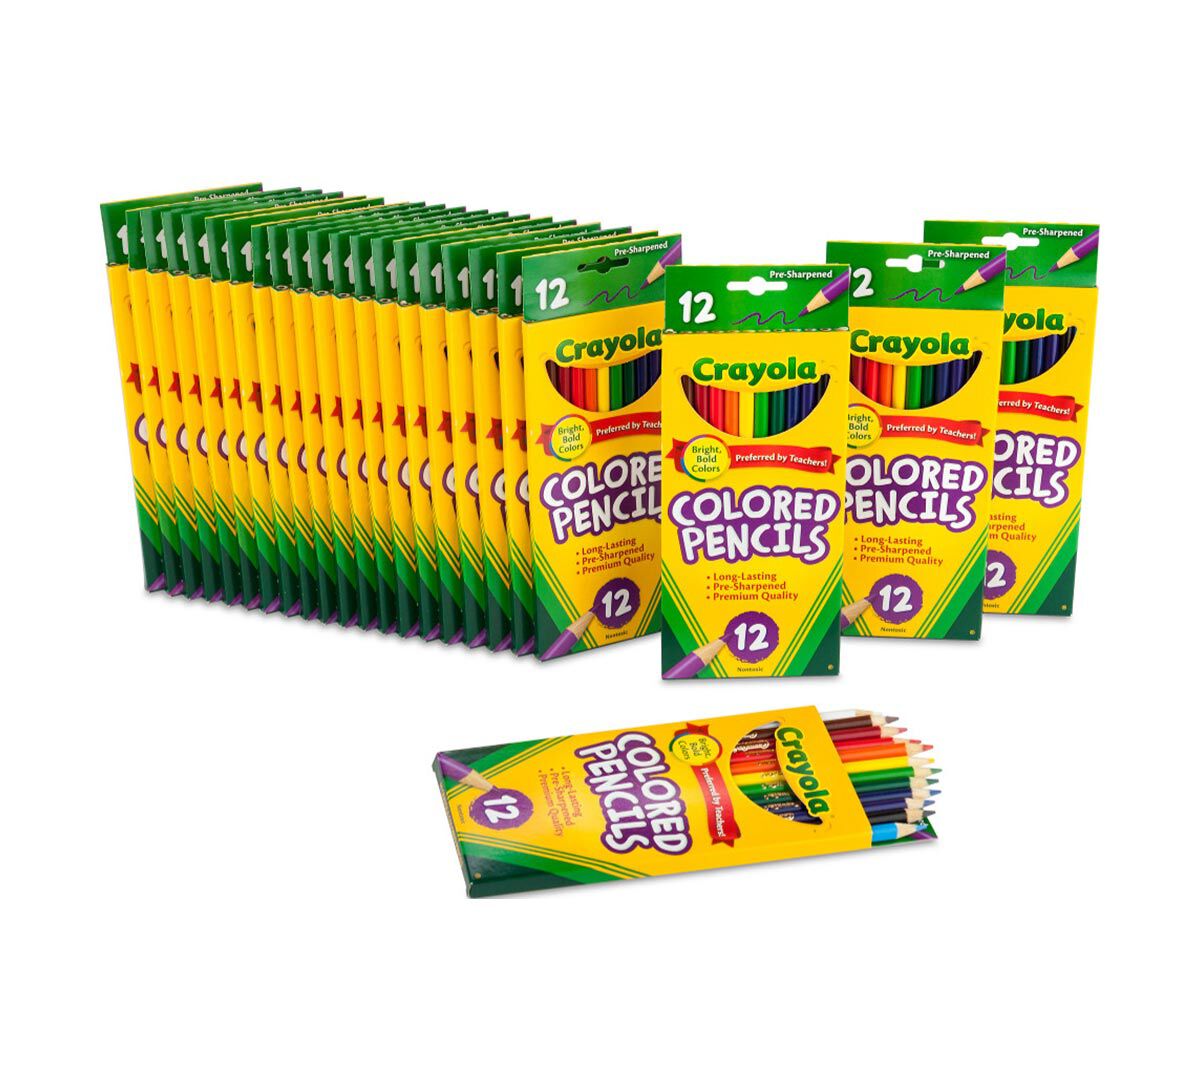 24 Box Classpack of 12 Count Long Colored Pencils | Crayola